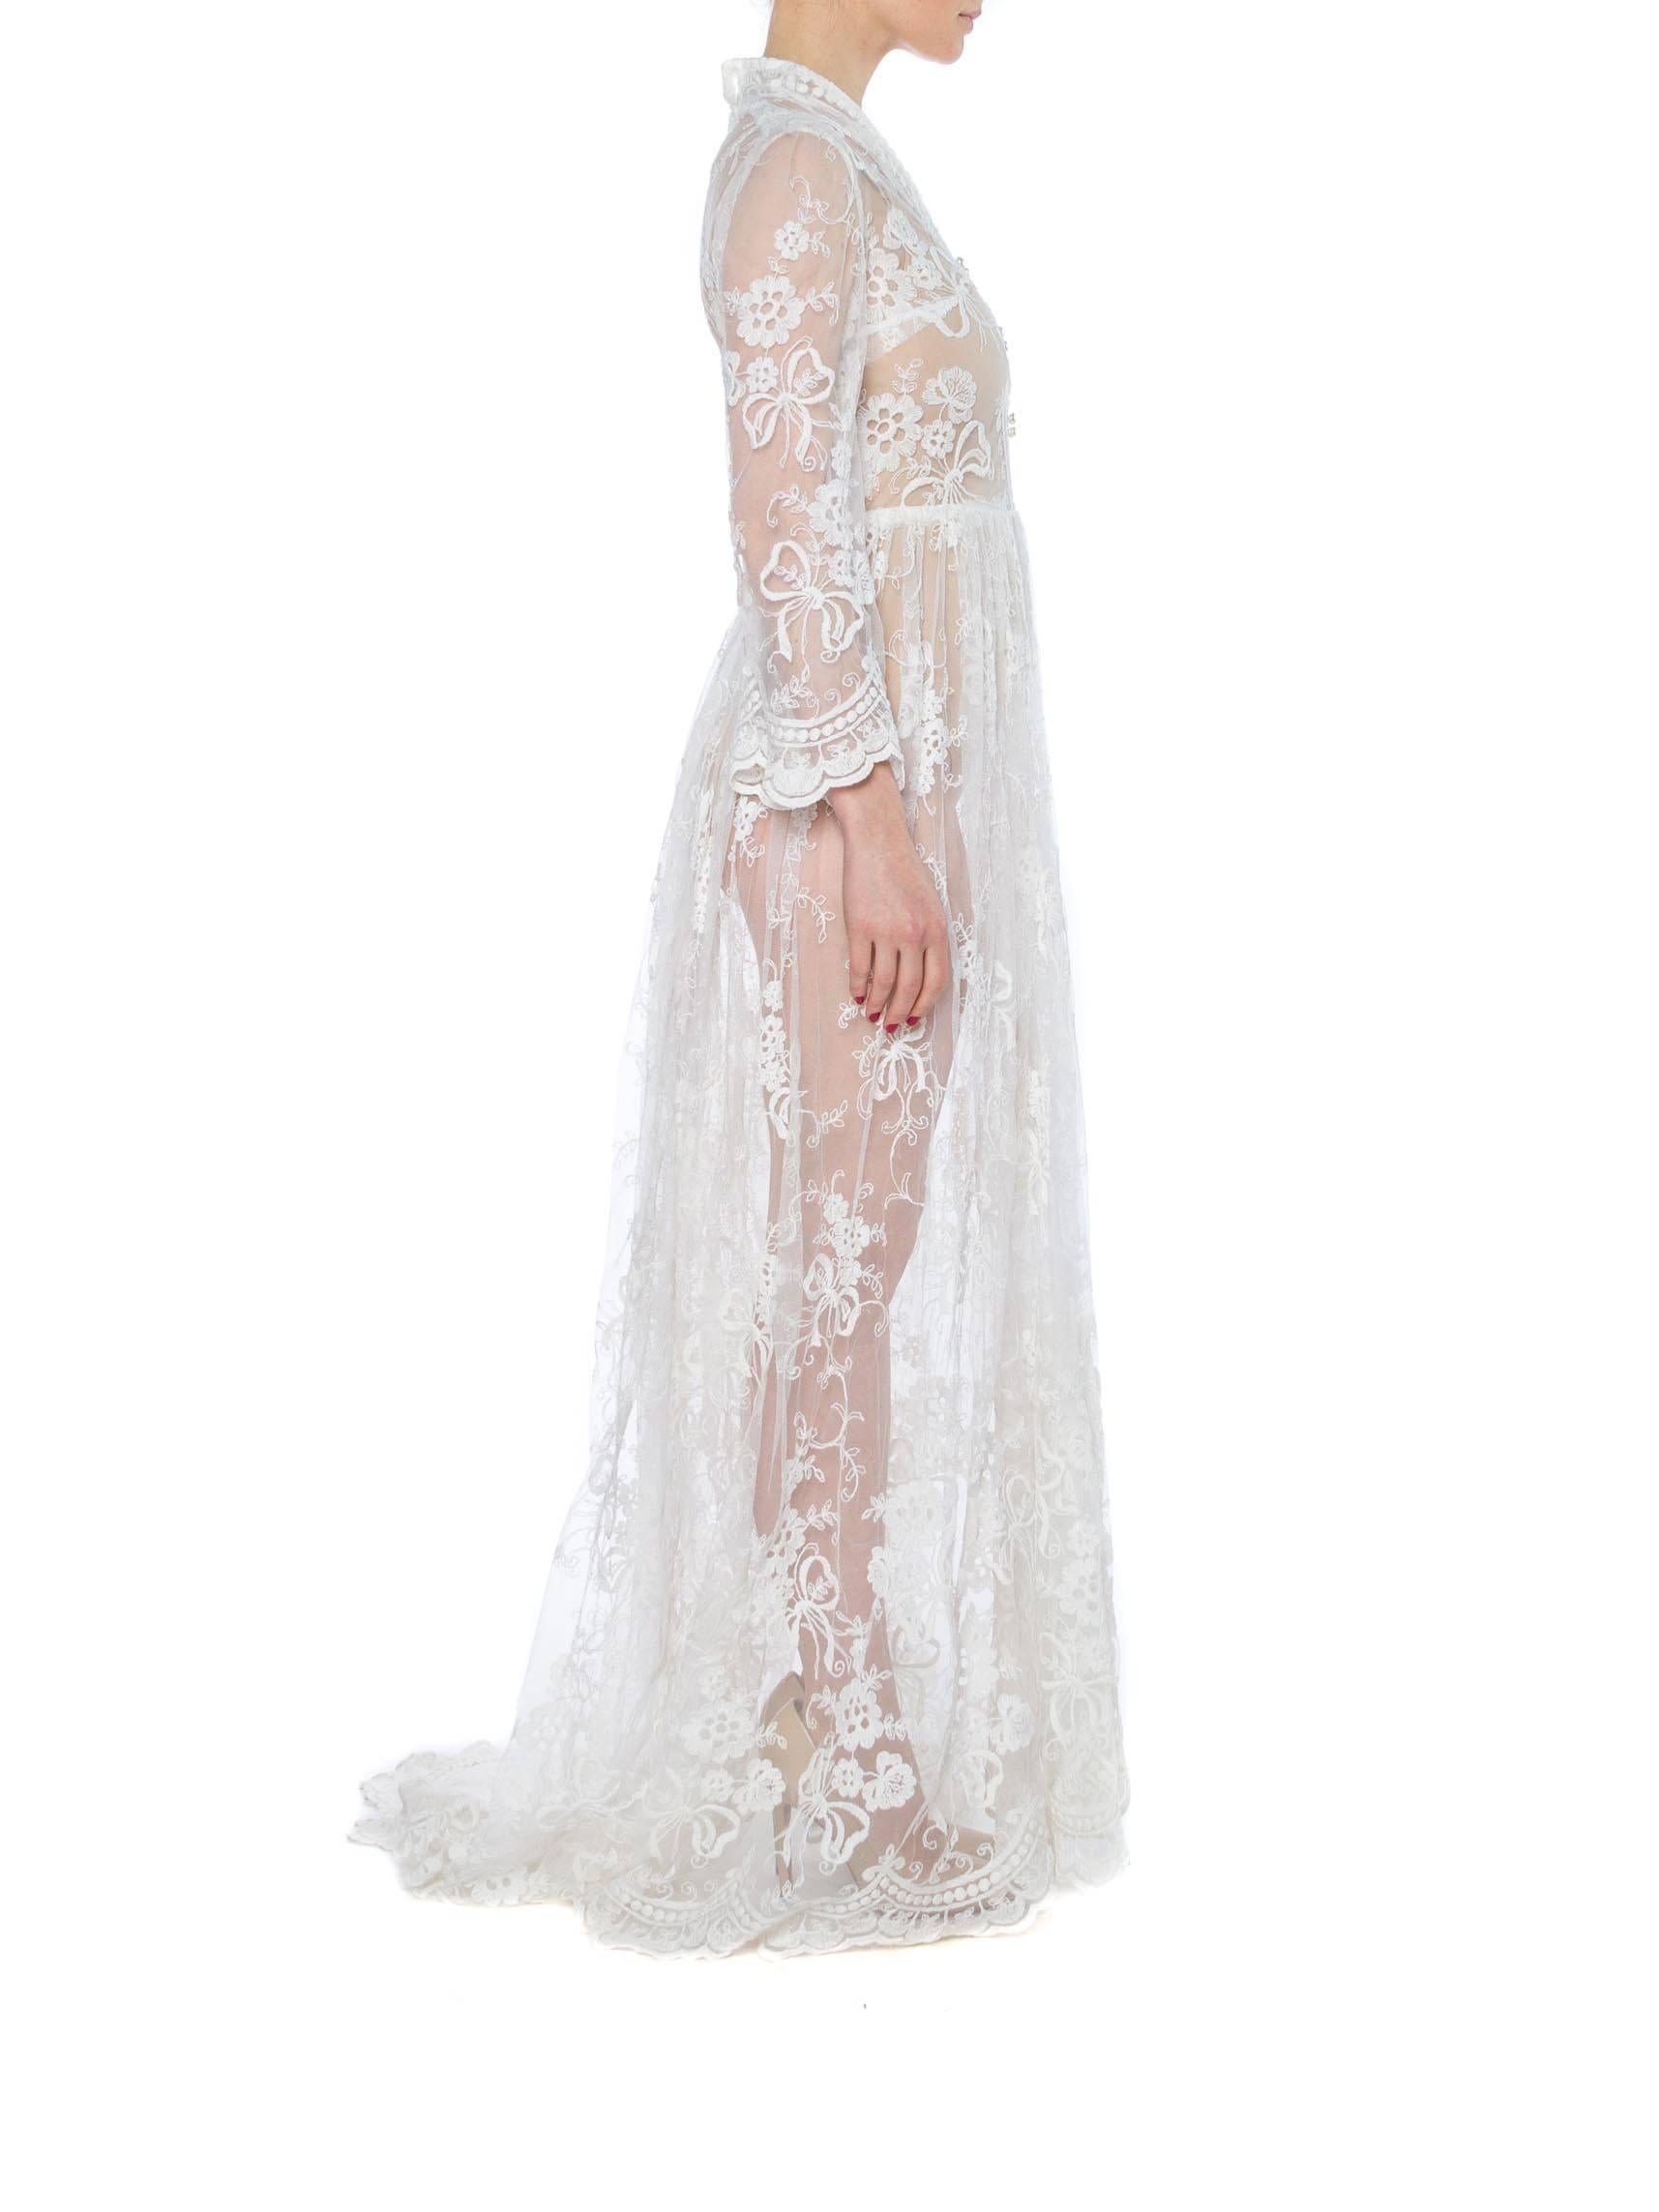 Women's Floral Embroidered Net Lace Dress with Sleeves